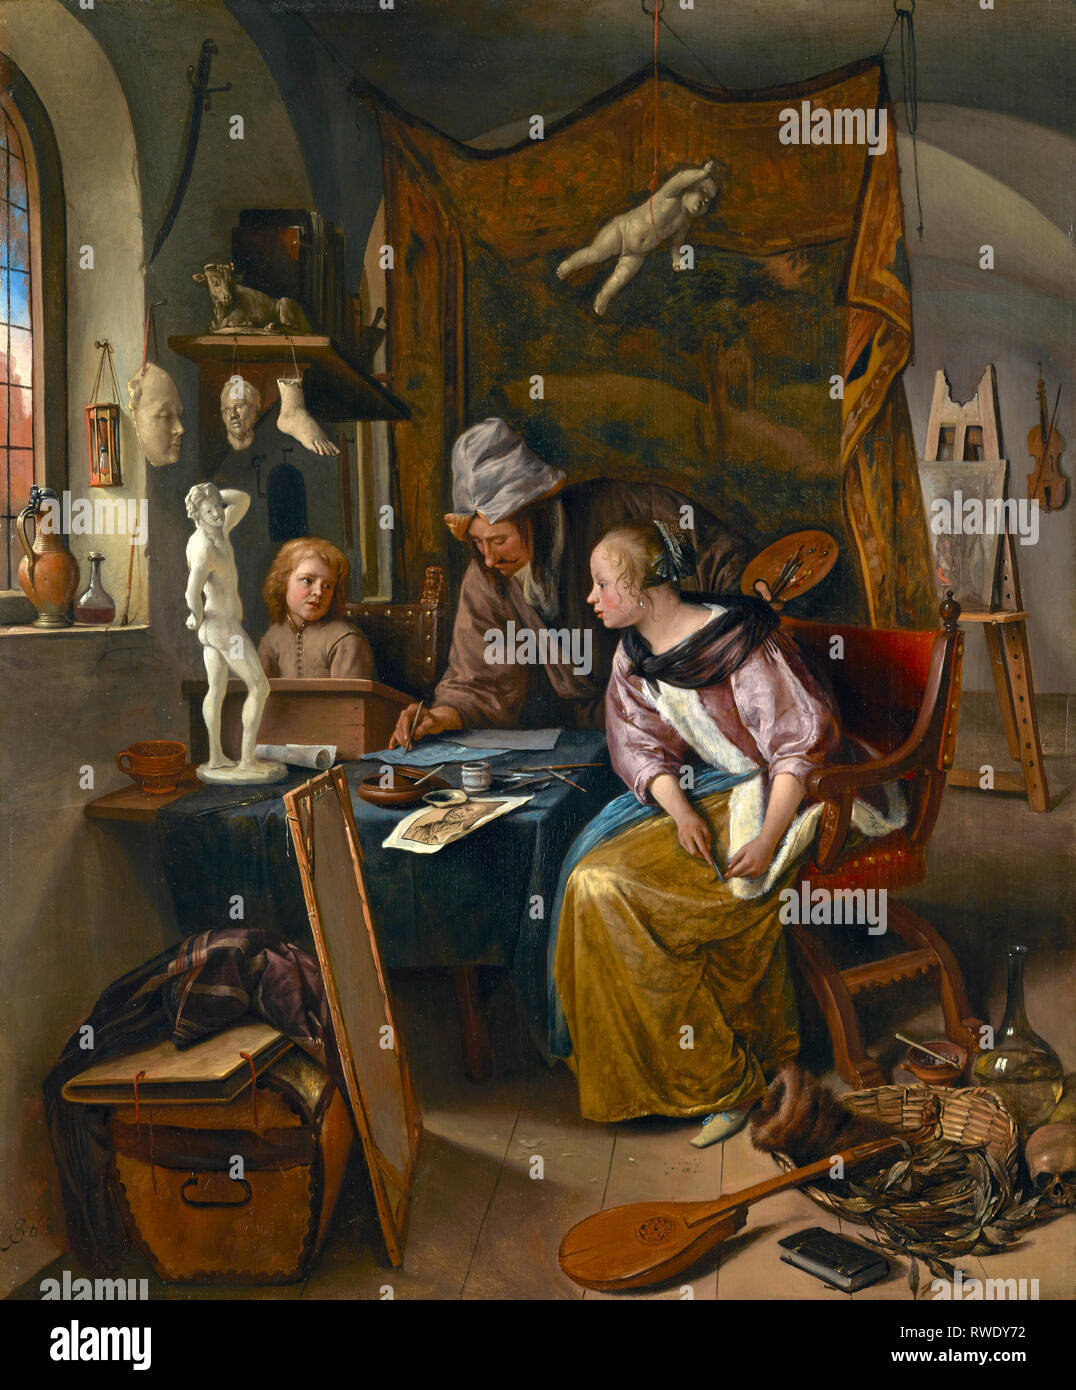 The Drawing Lesson; Jan Steen (Dutch, 1626 - 1679); about 1665; Oil on panel; 4Digital image courtesy of the Getty's Open Content Program. Stock Photo